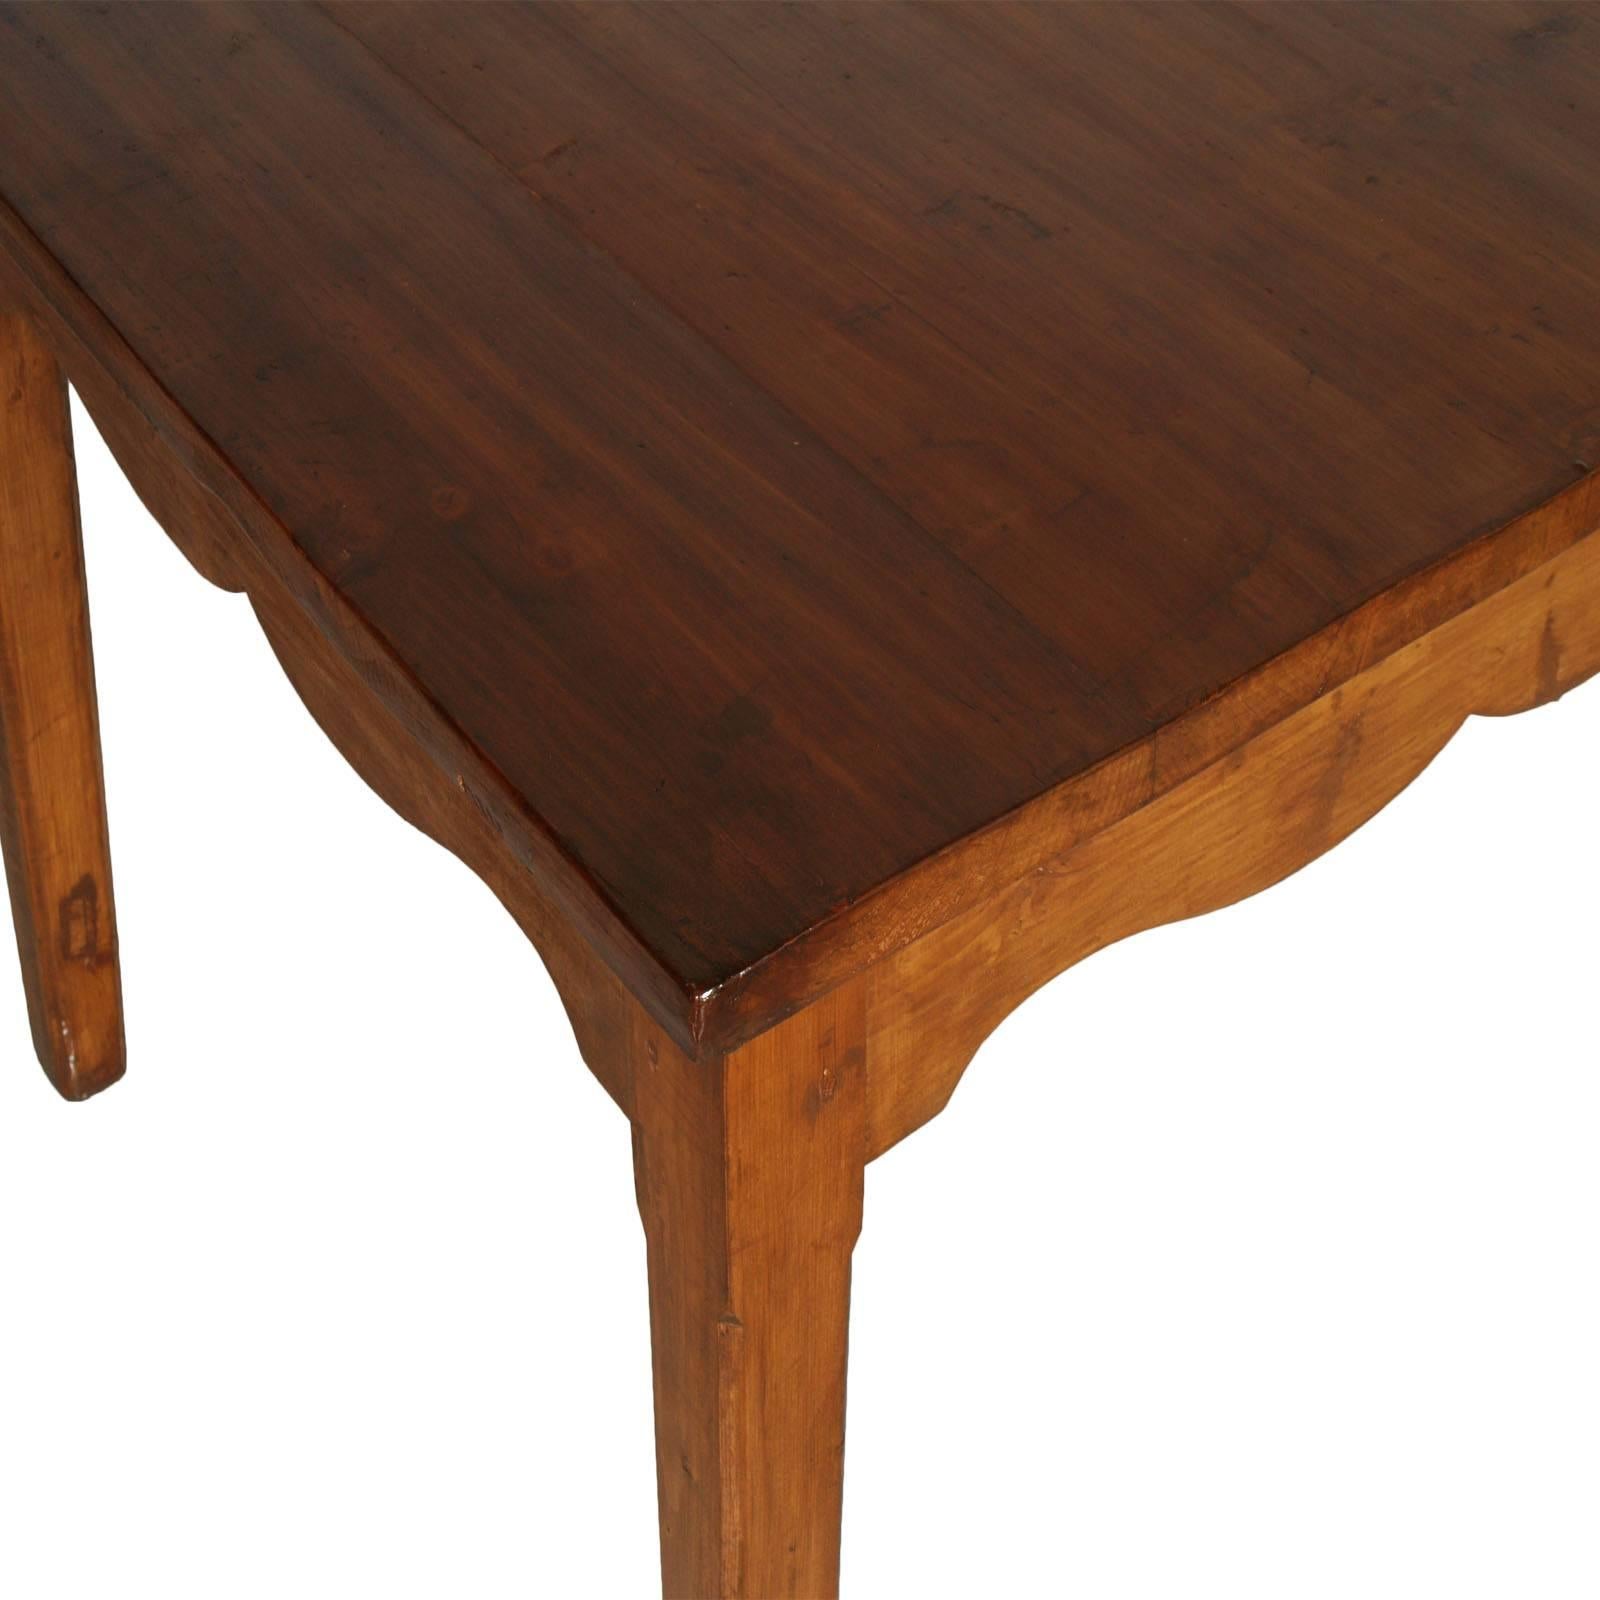 Early 20th century Tyrolean square table, in solid larch, rustic mountain, style Art Deco period, 1920s
The table was vax polished 

Measure in cm: H 78 x W 100 x D 100.